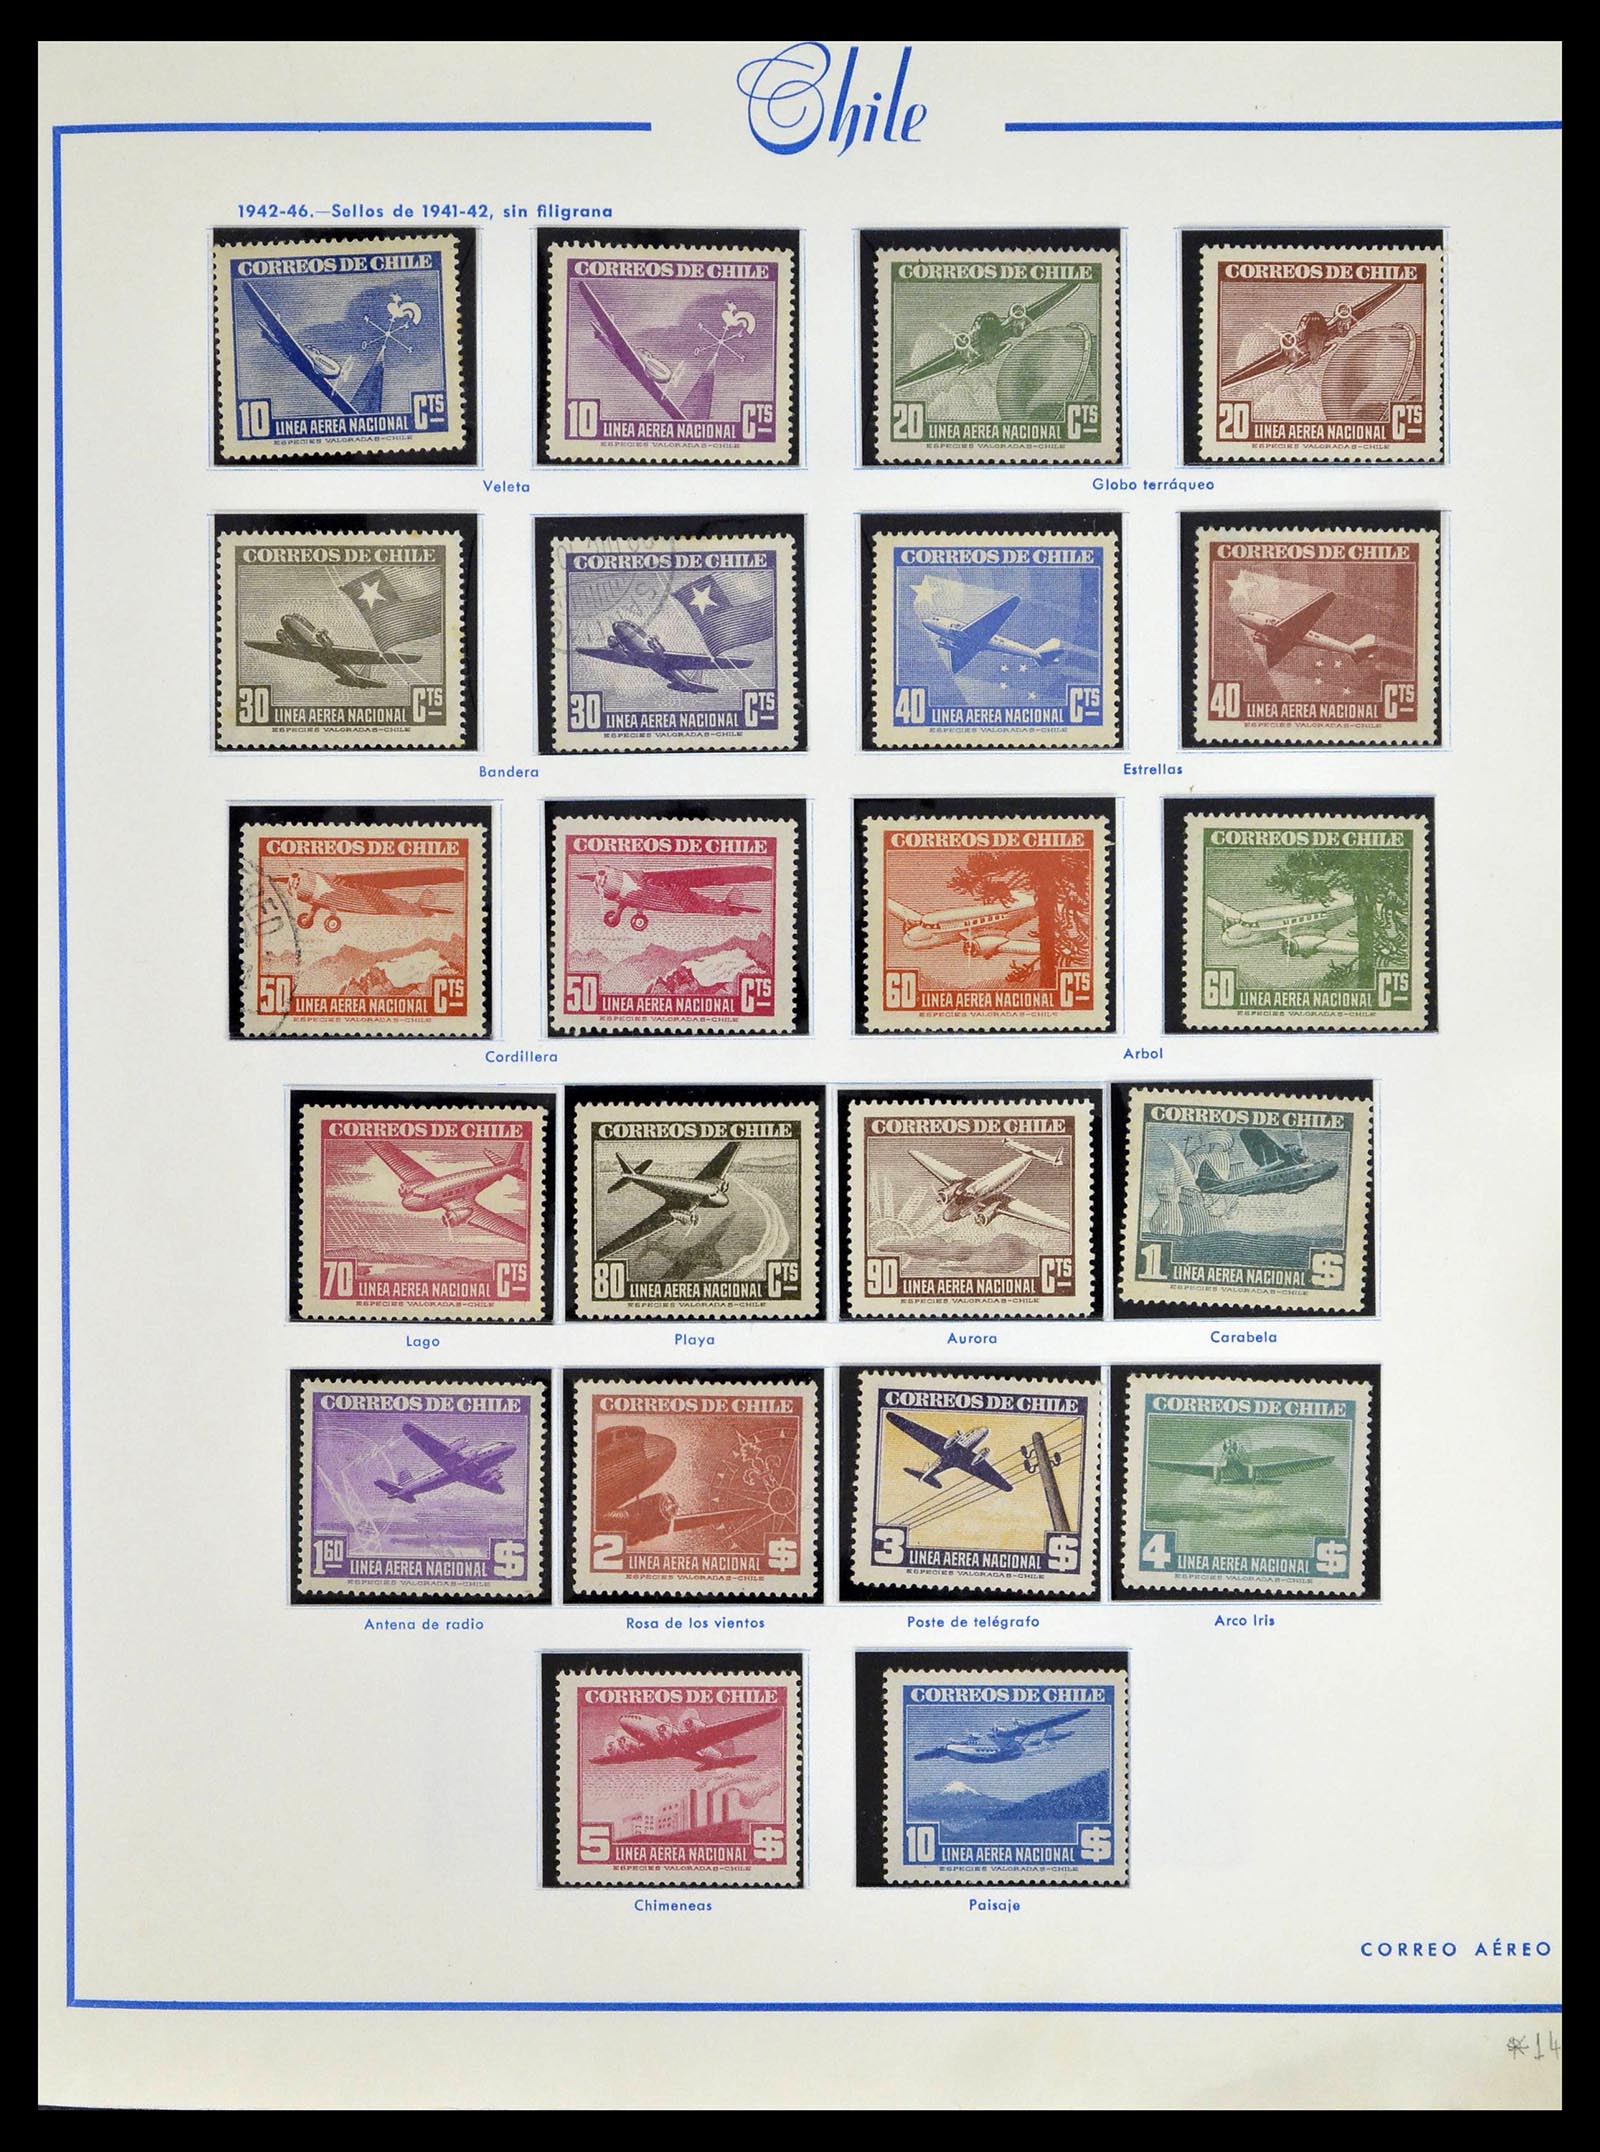 39213 0046 - Stamp collection 39213 Chile 1853-1970.